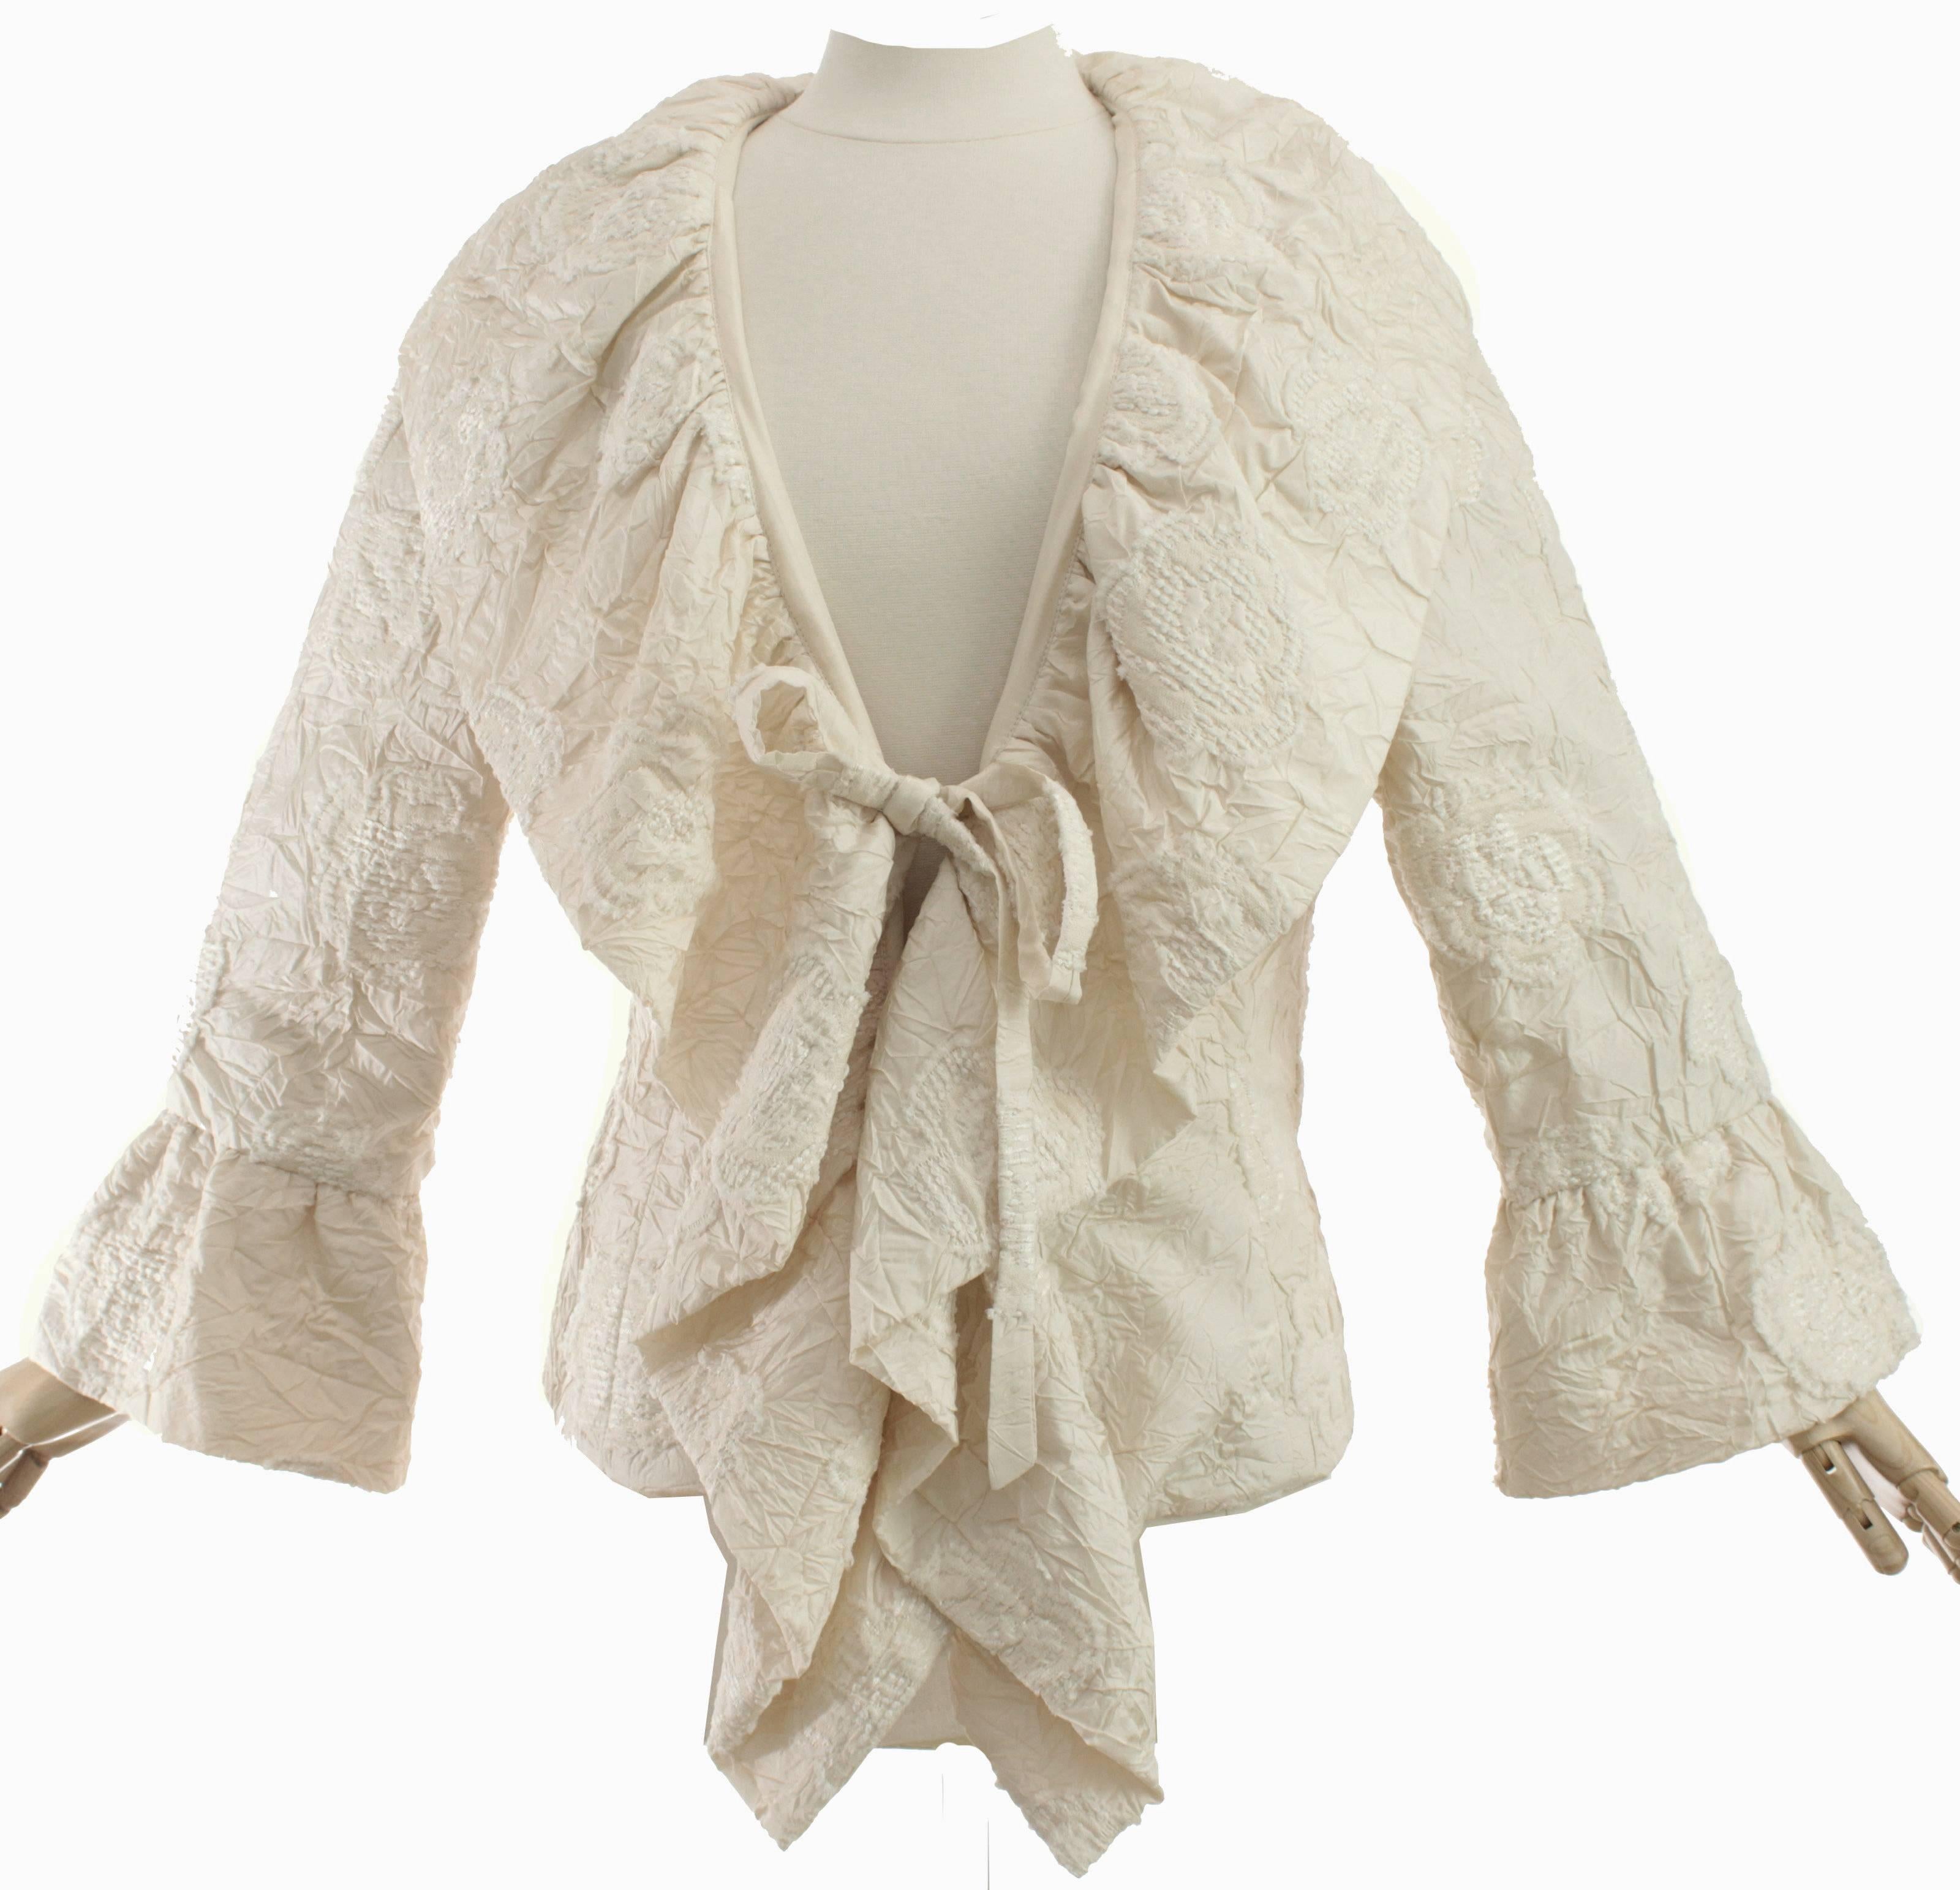 This silk jacket is made from a rich creamy ivory colored silk, with a Camellia floral motif throughout and fastens in front with embroidered ties.  The substantial collar goes all the way to the hem and can be propped up or worn down,  Each sleeve